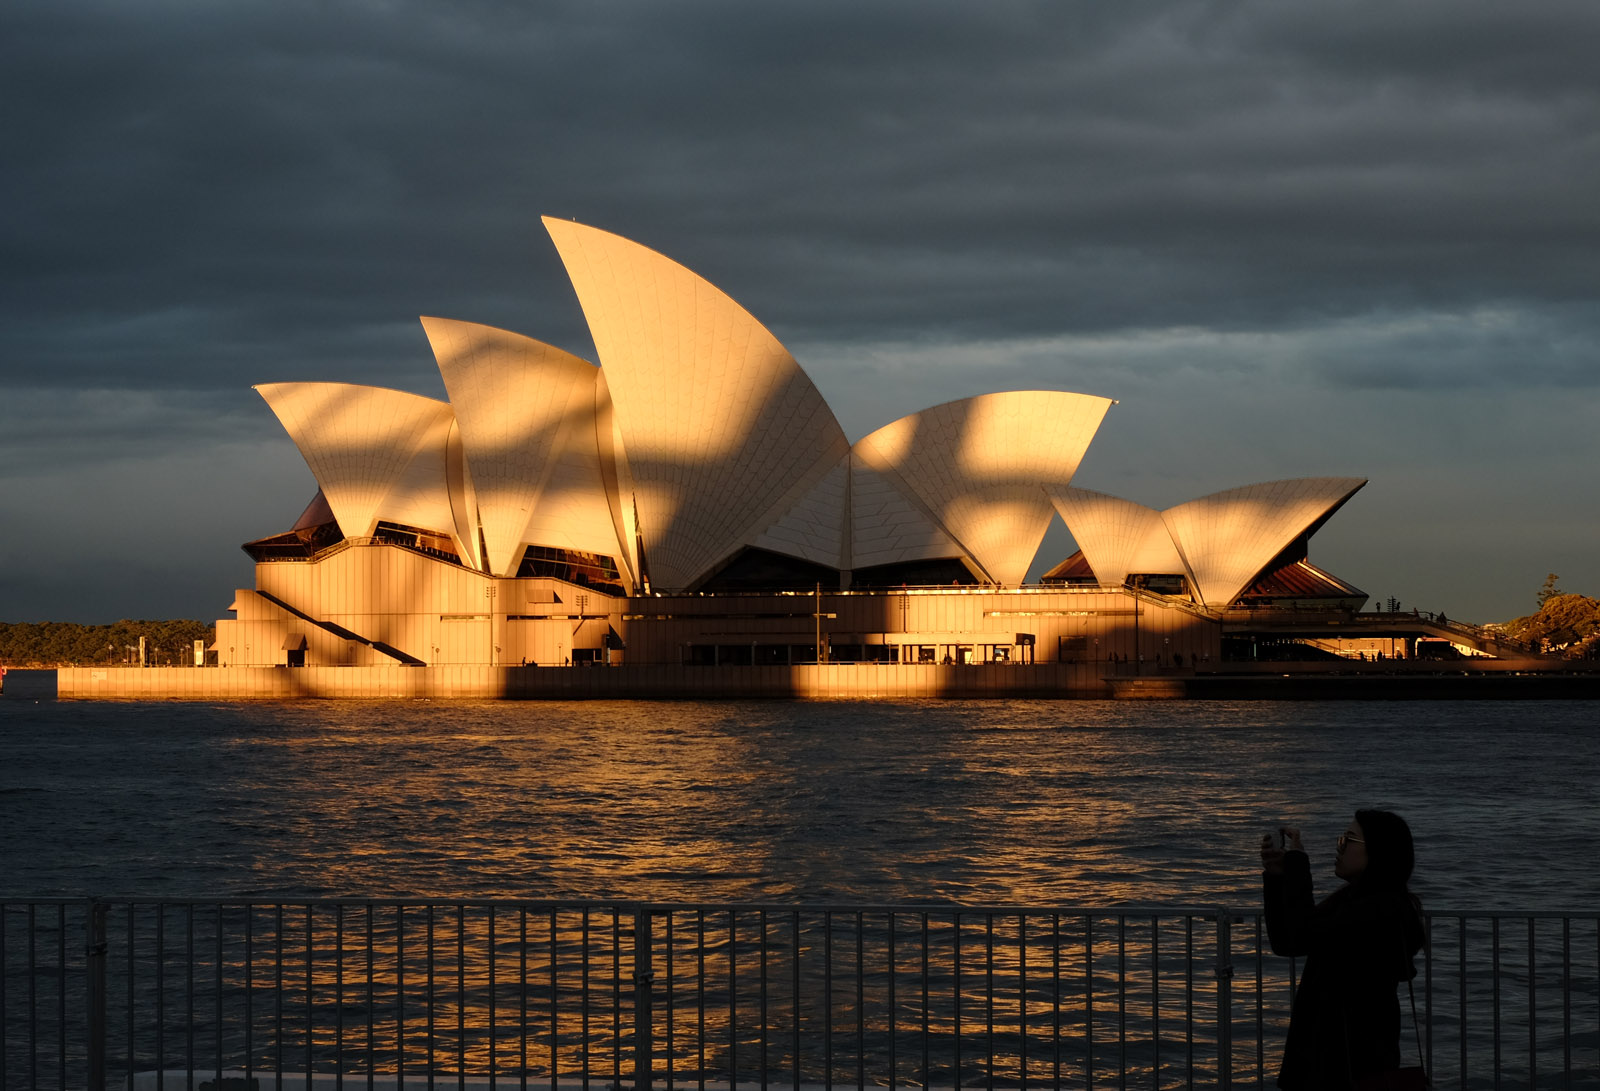 Sydney Travel photography and 360 Panoramas and Photospheres by Kent Johnson.